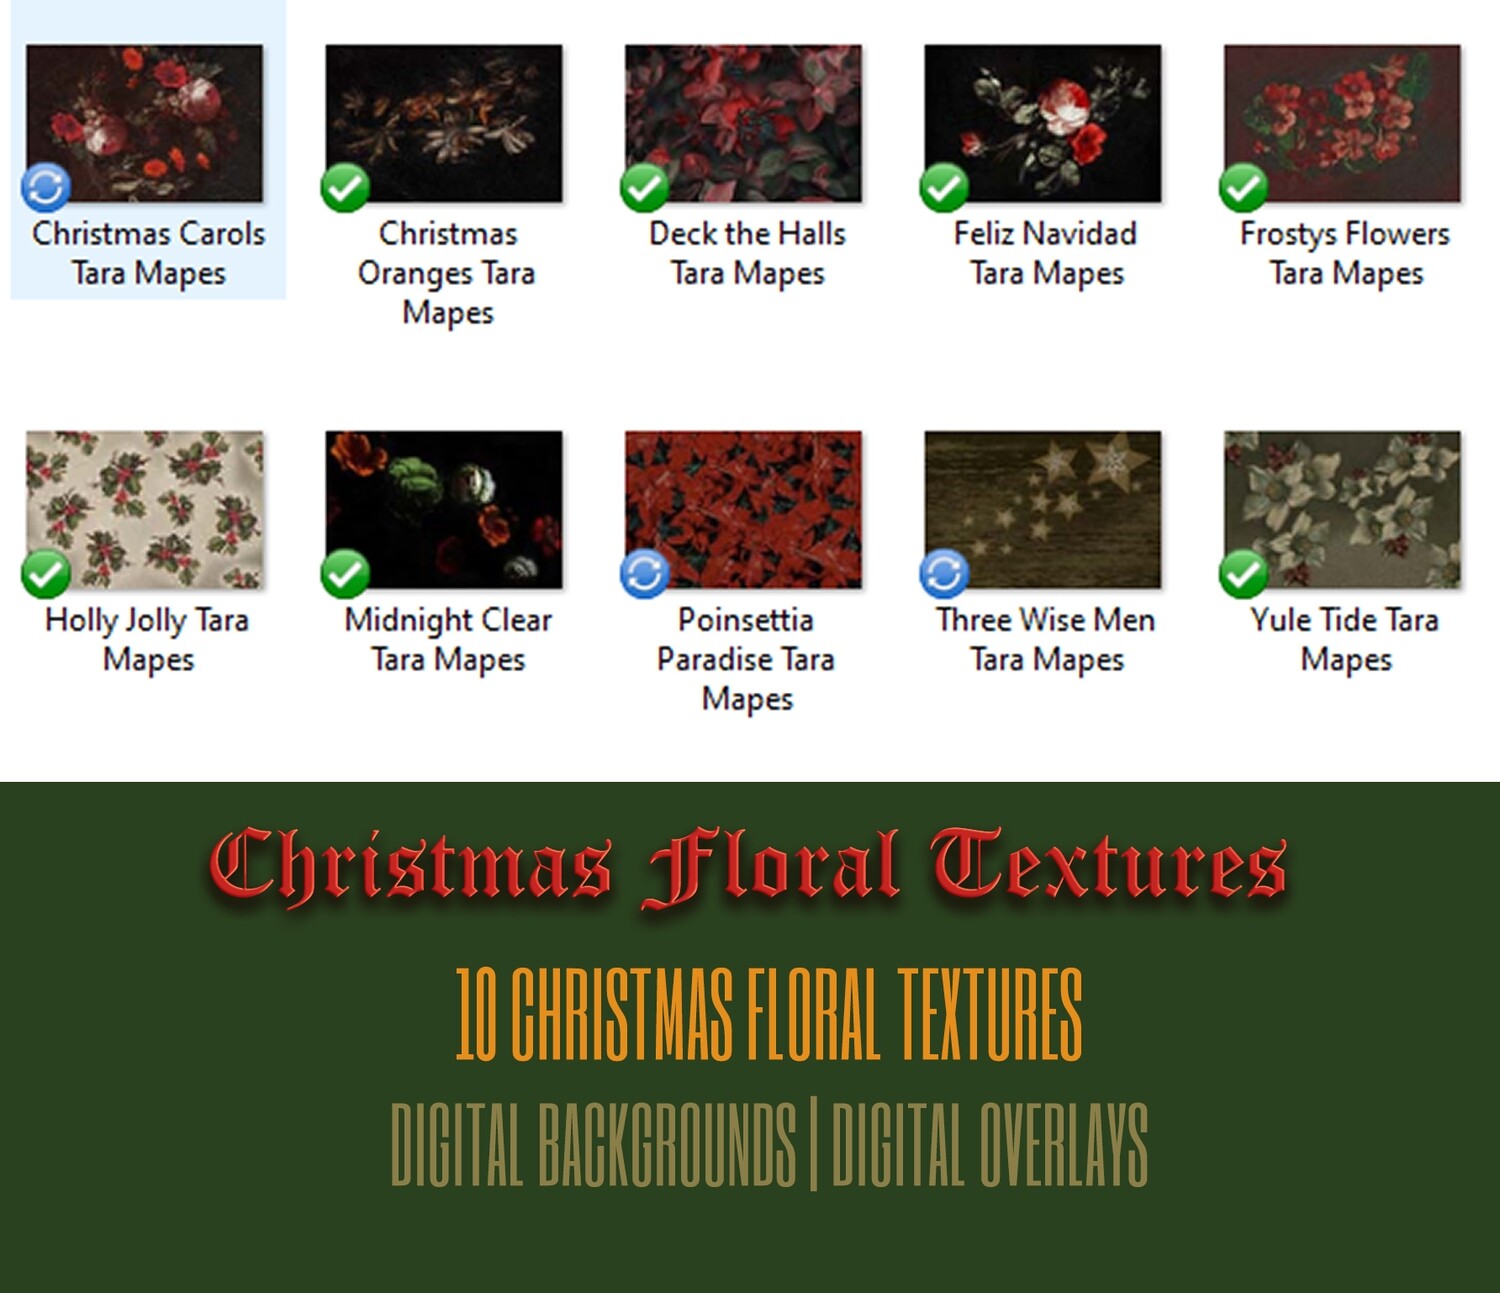 10 Old Masters Christmas Floral Textures -Floral Backdrops - Digital Backgrounds - CHRISTMAS COLLECTION Photoshop Overlays by Tara Mapes